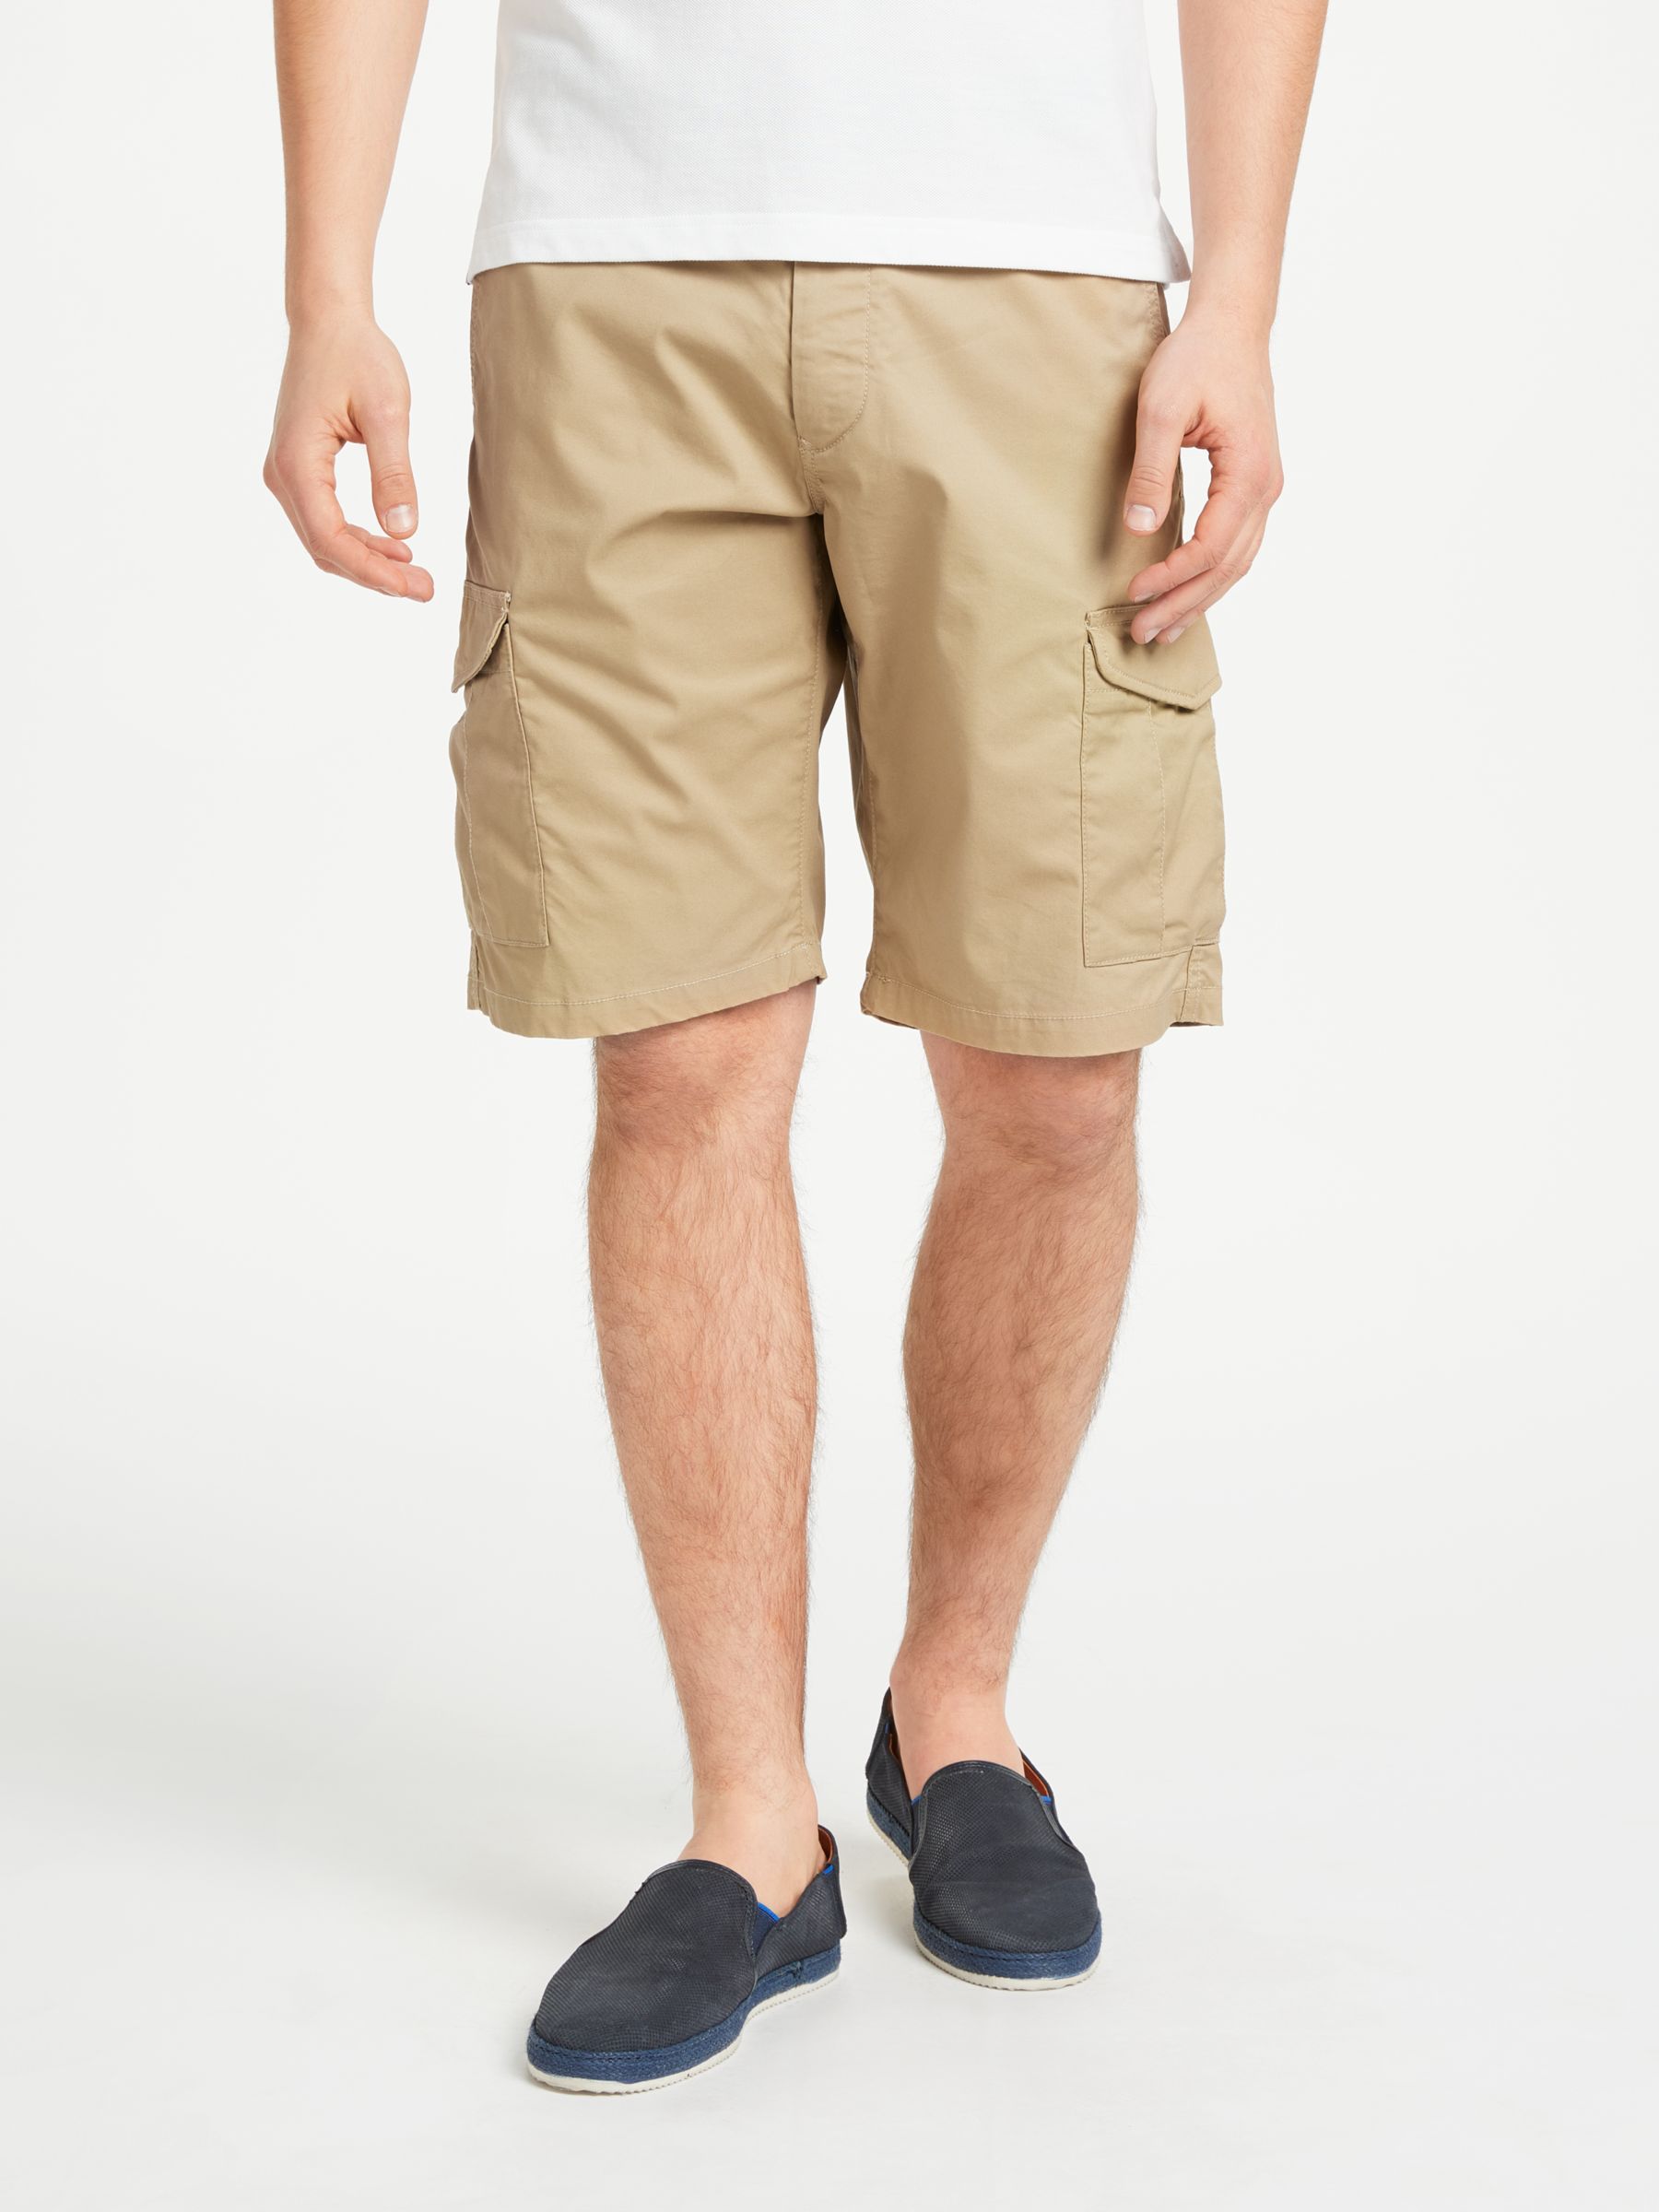 Gant Relaxed Belted Cargo Shorts, Stone, 36R